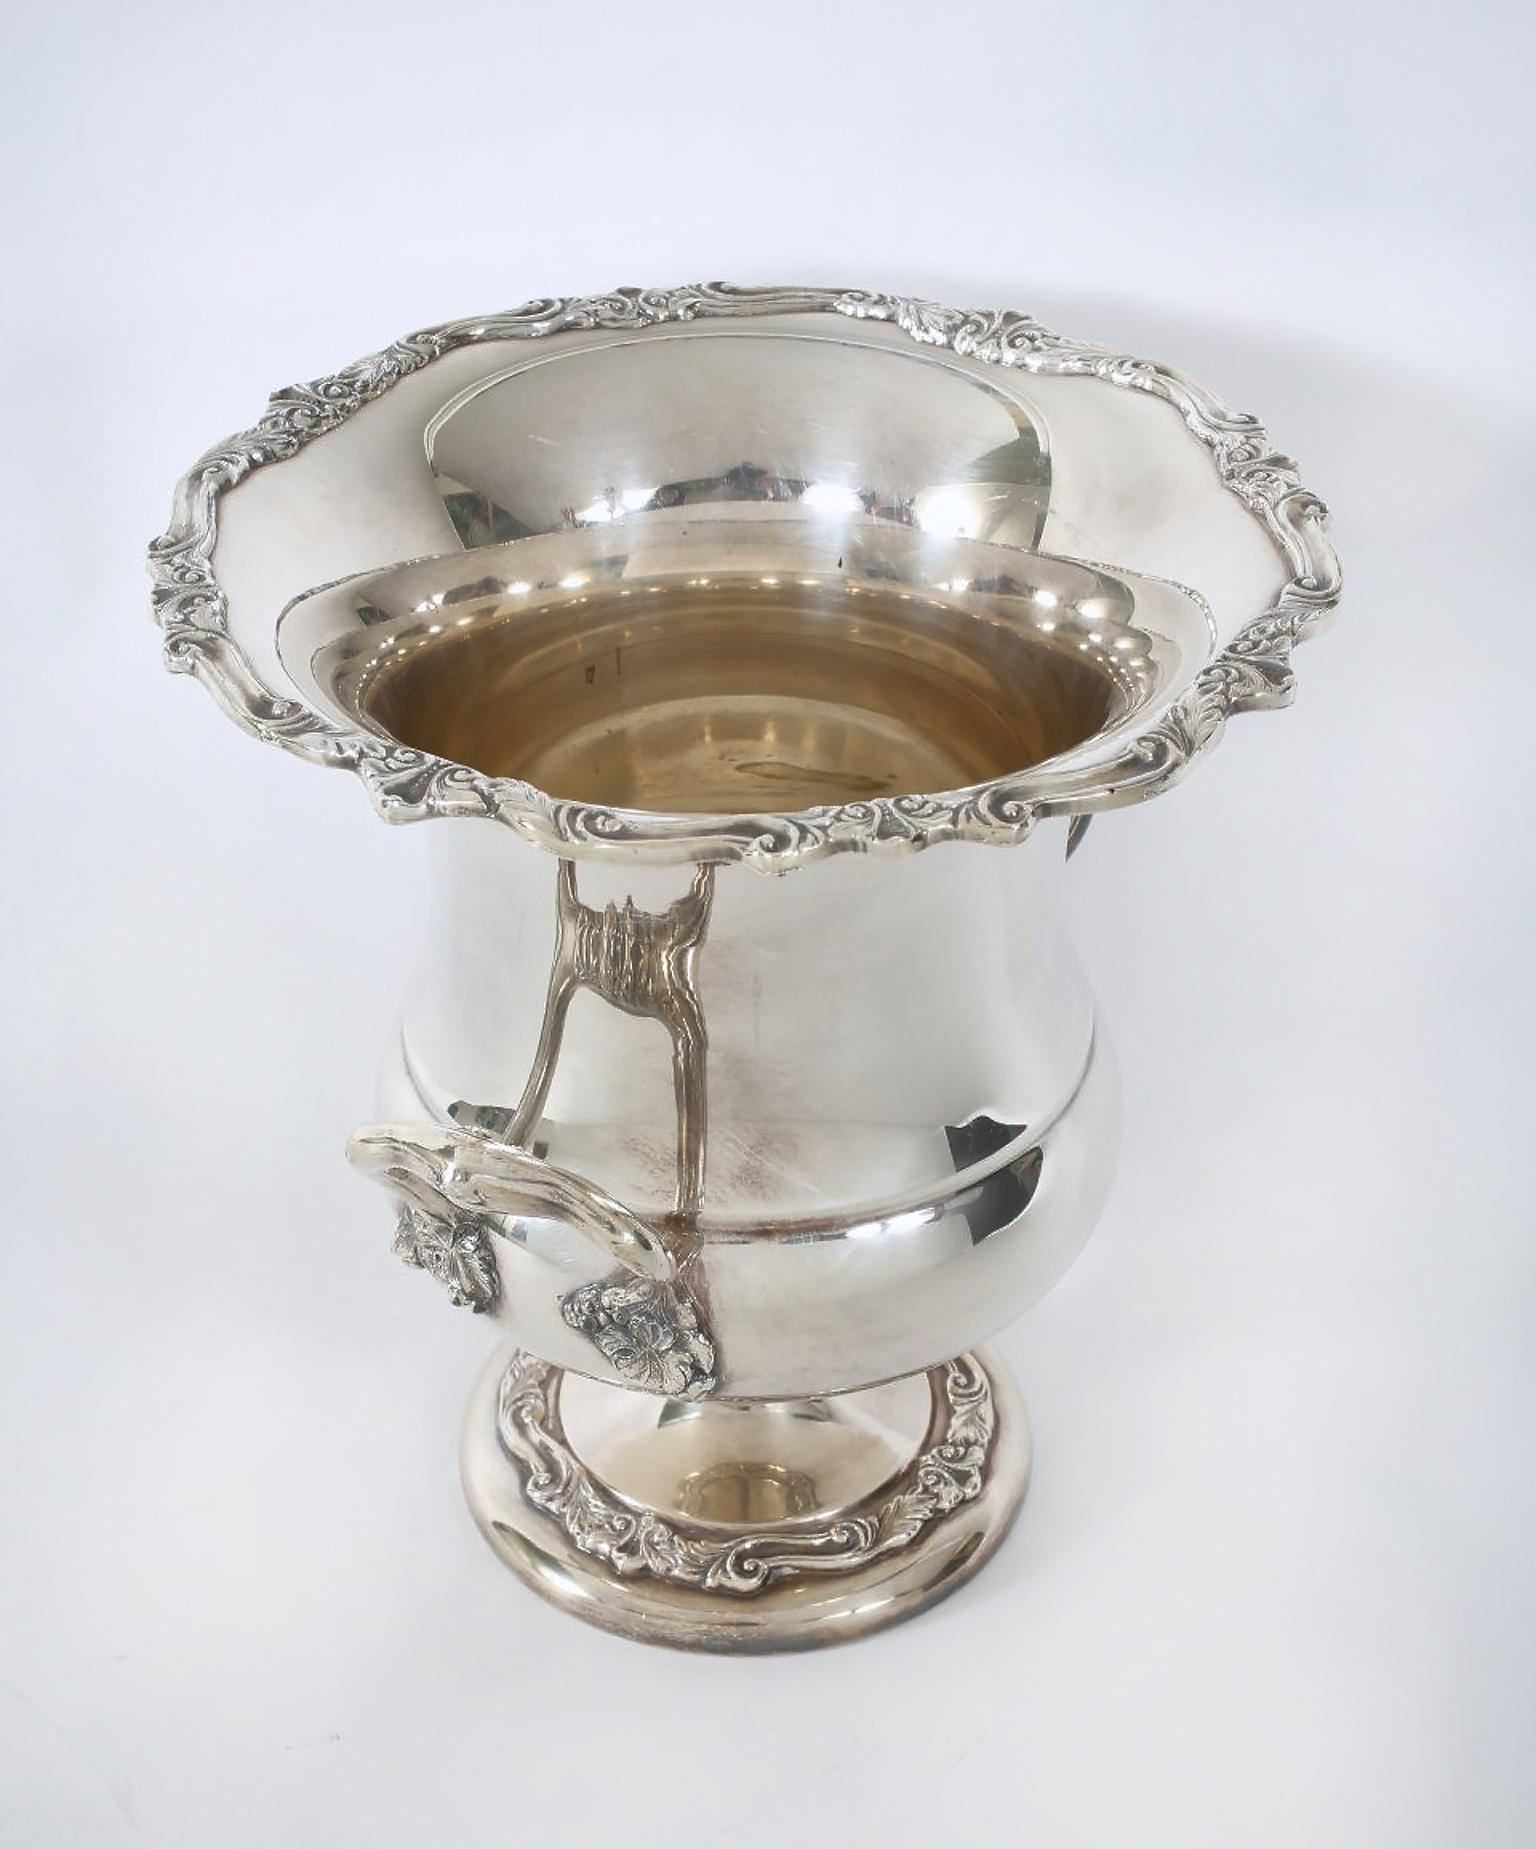 English Silver Plated Wine Cooler / Side Handles 2